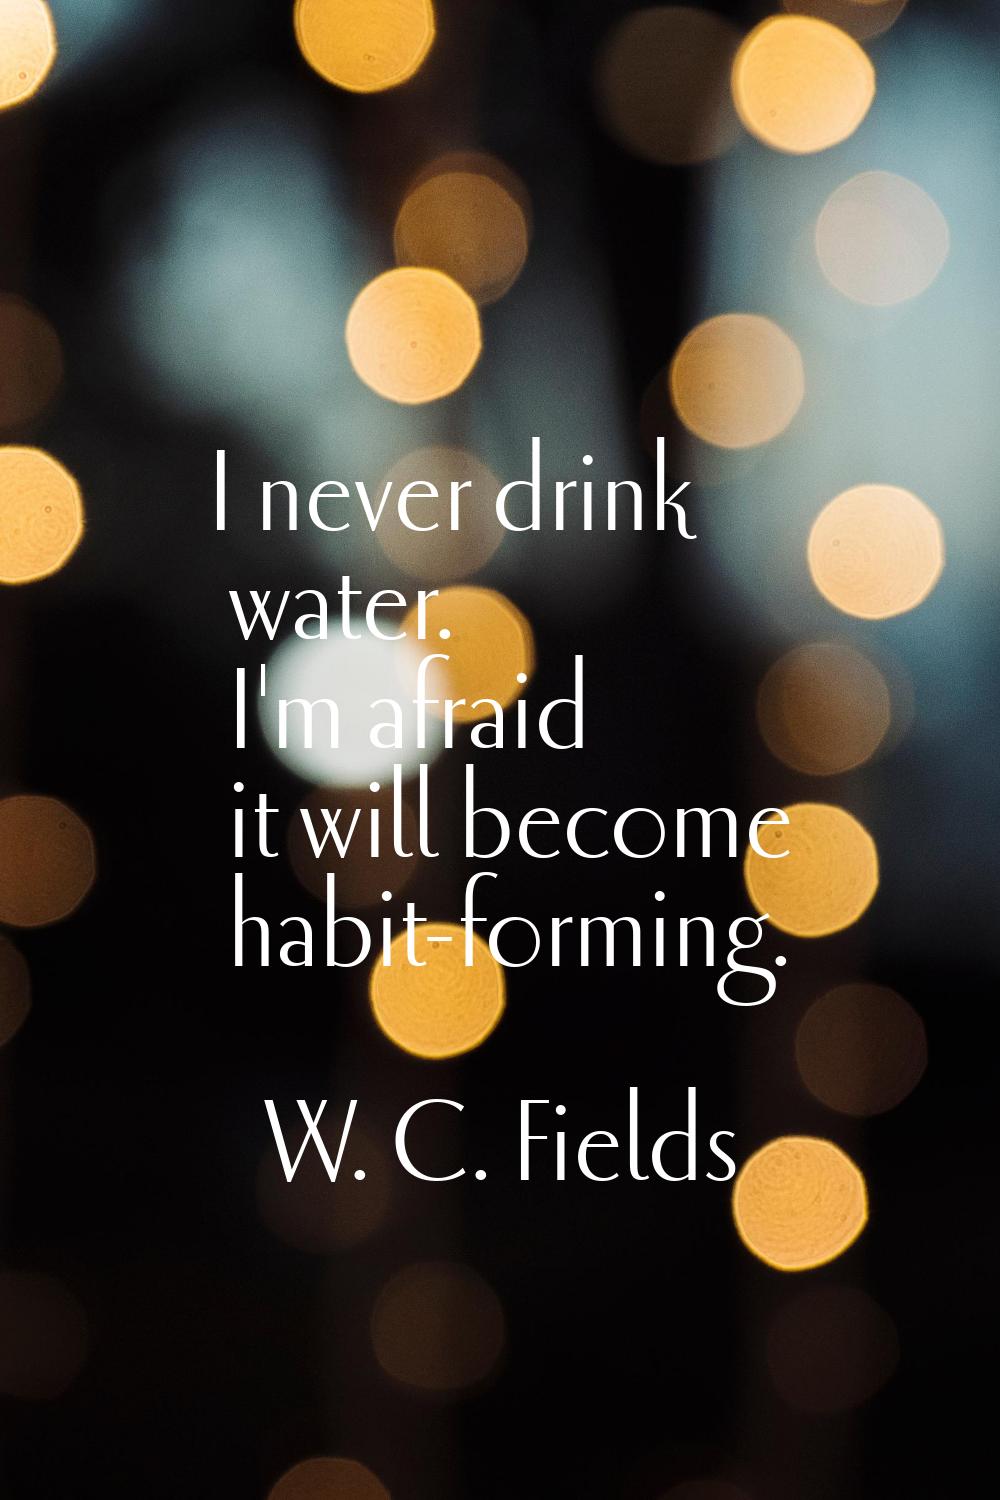 I never drink water. I'm afraid it will become habit-forming.